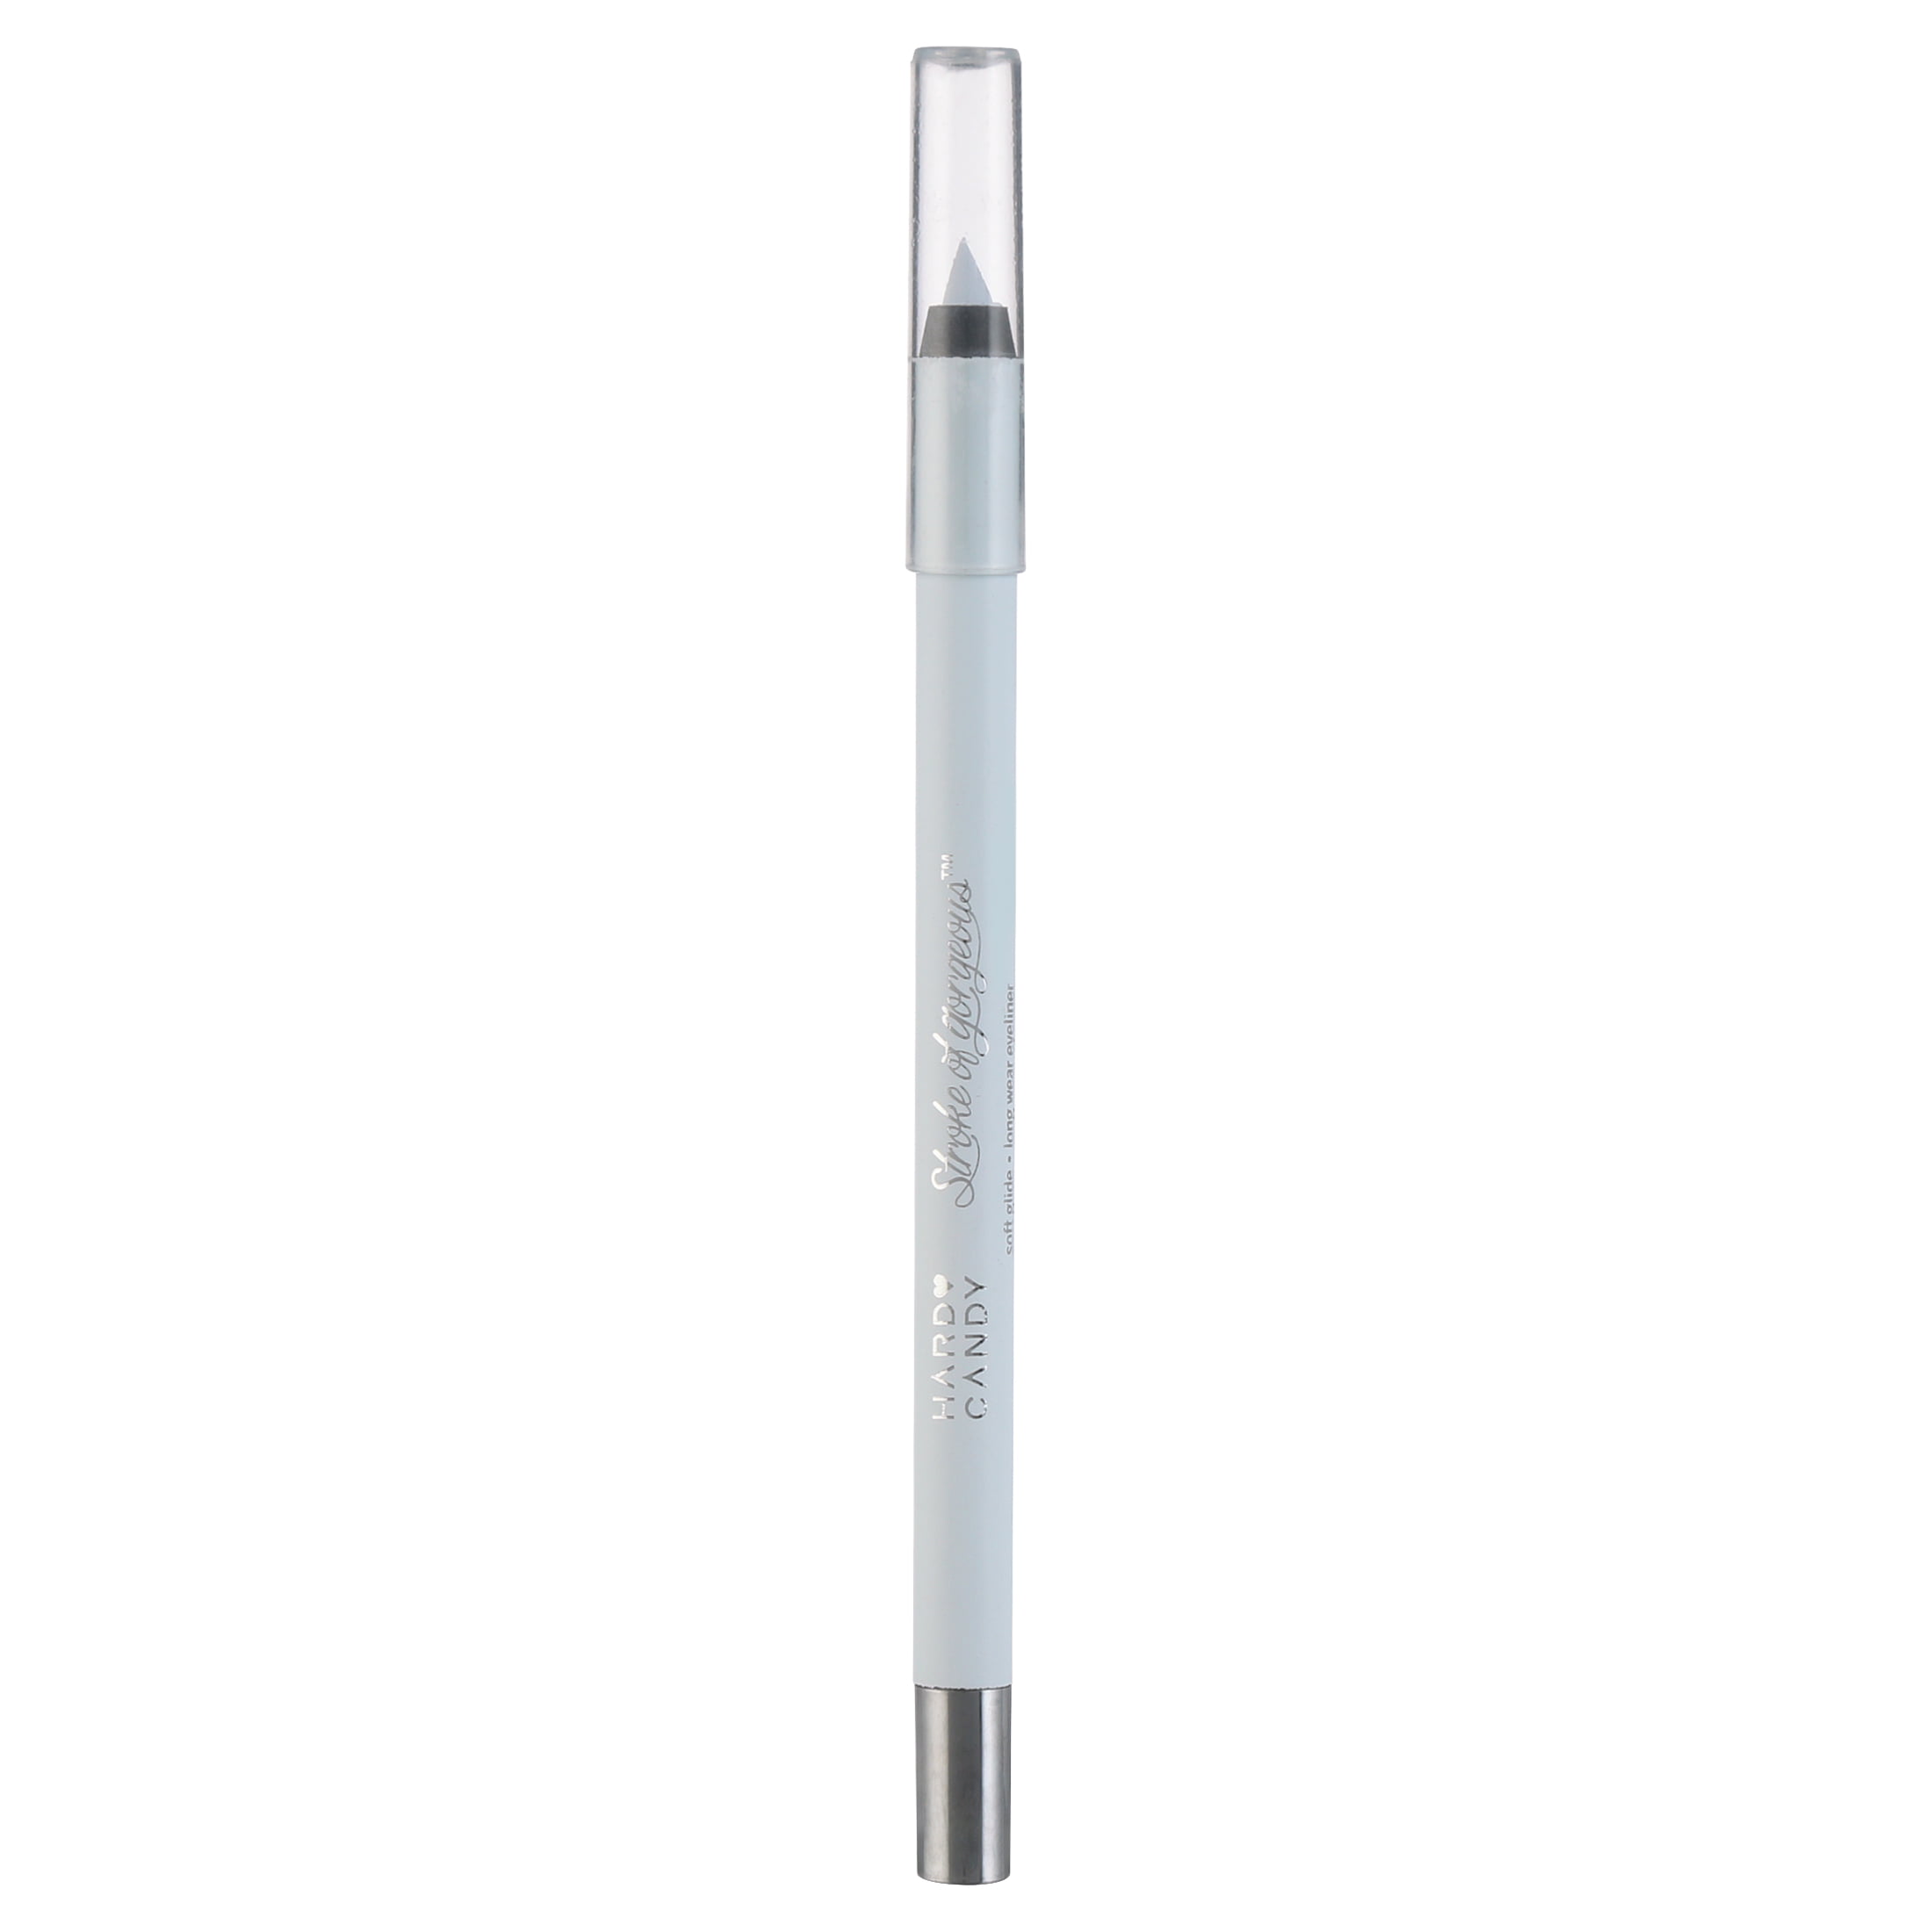 Promotional Curvaceous Infinity Pencil $1.29